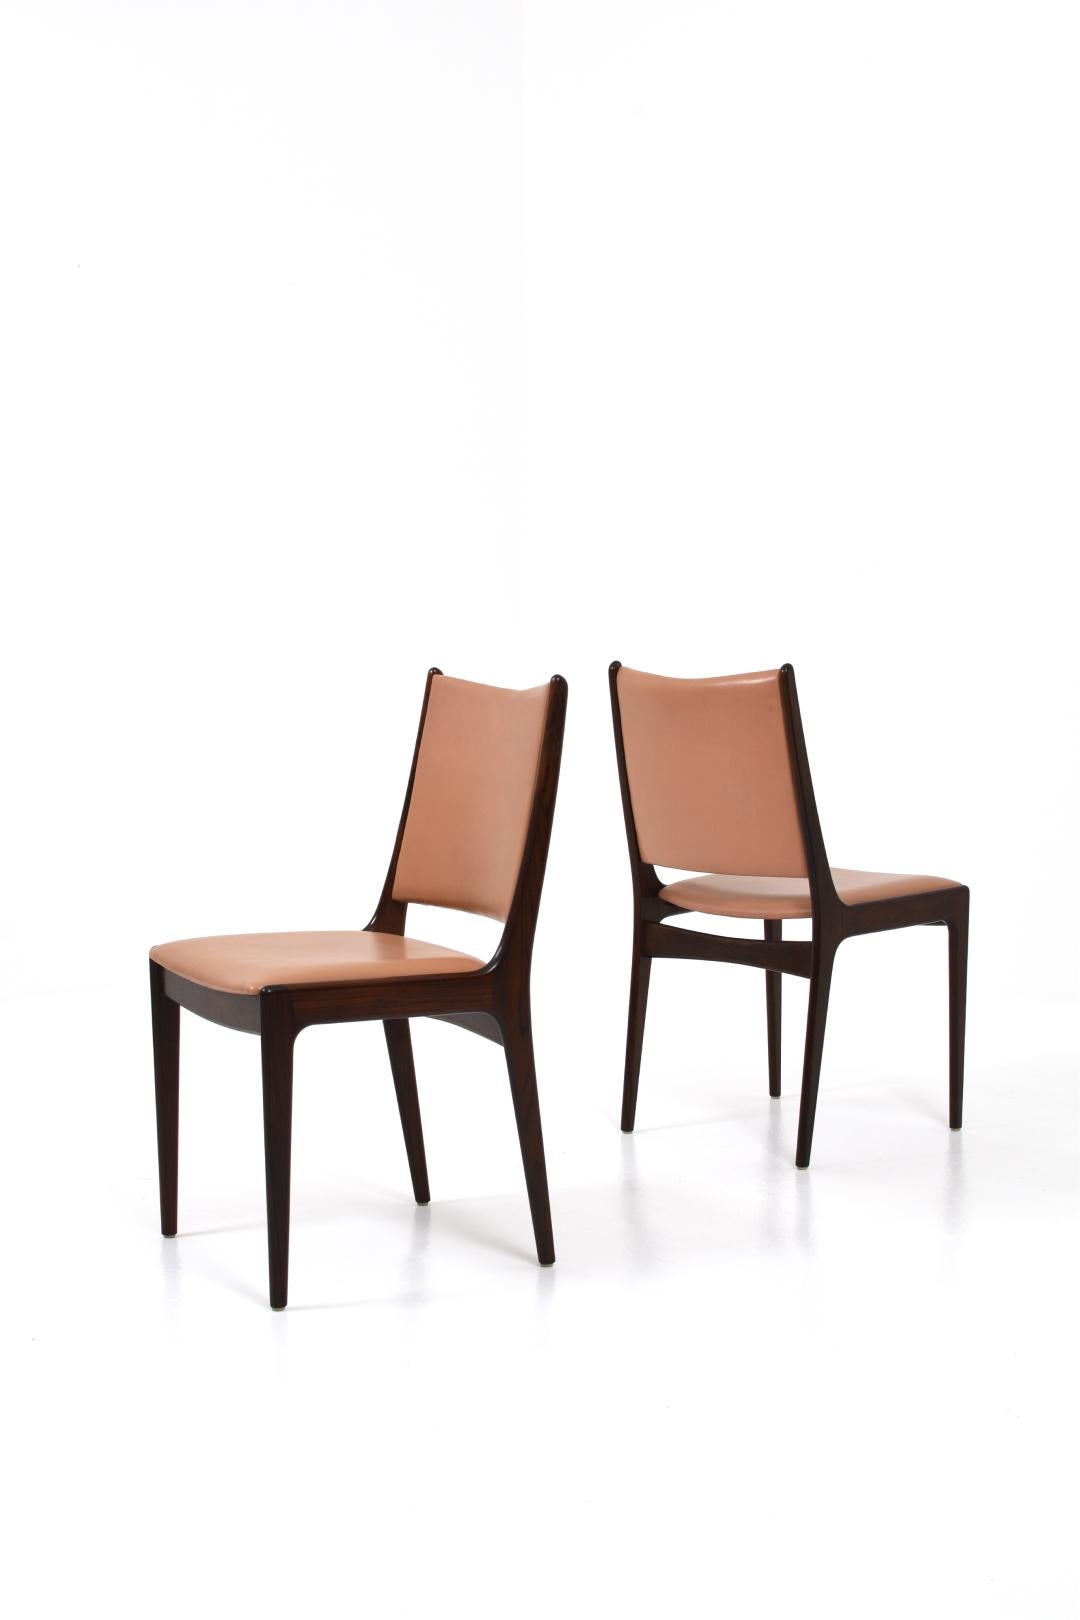 The design of the chairs embodies a harmonious blend of modern aesthetics and timeless sophistication. The smooth backrest provides comfortable support, while the ergonomic seating provides a comfortable experience for longer periods. The chair's